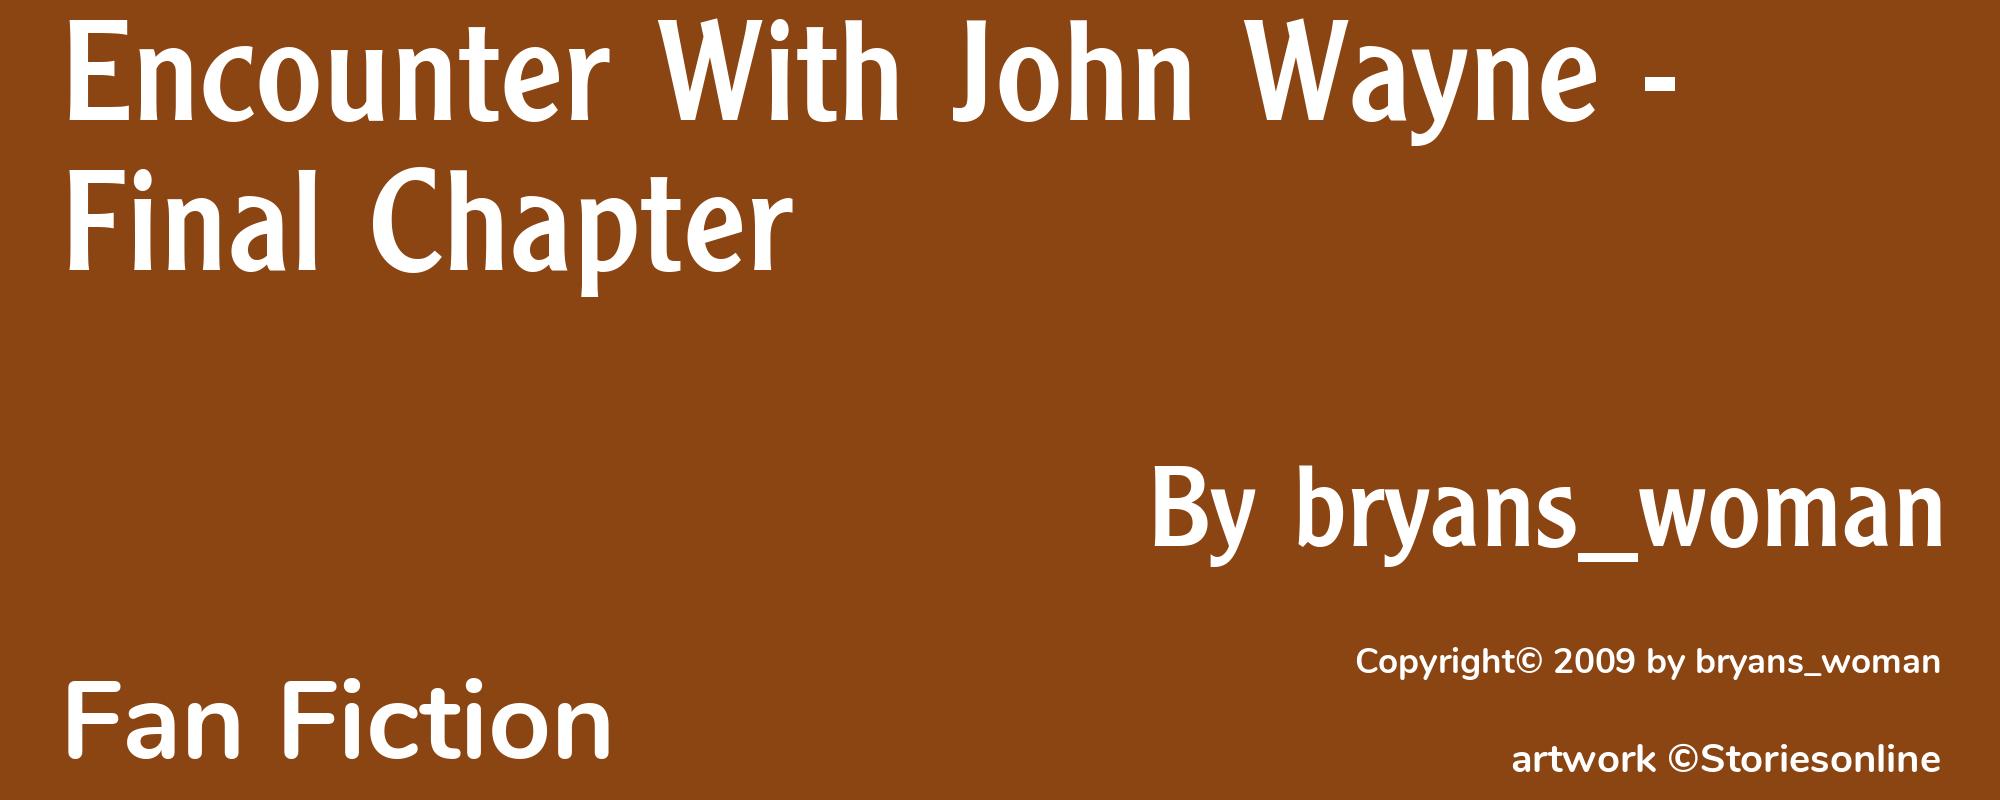 Encounter With John Wayne - Final Chapter - Cover